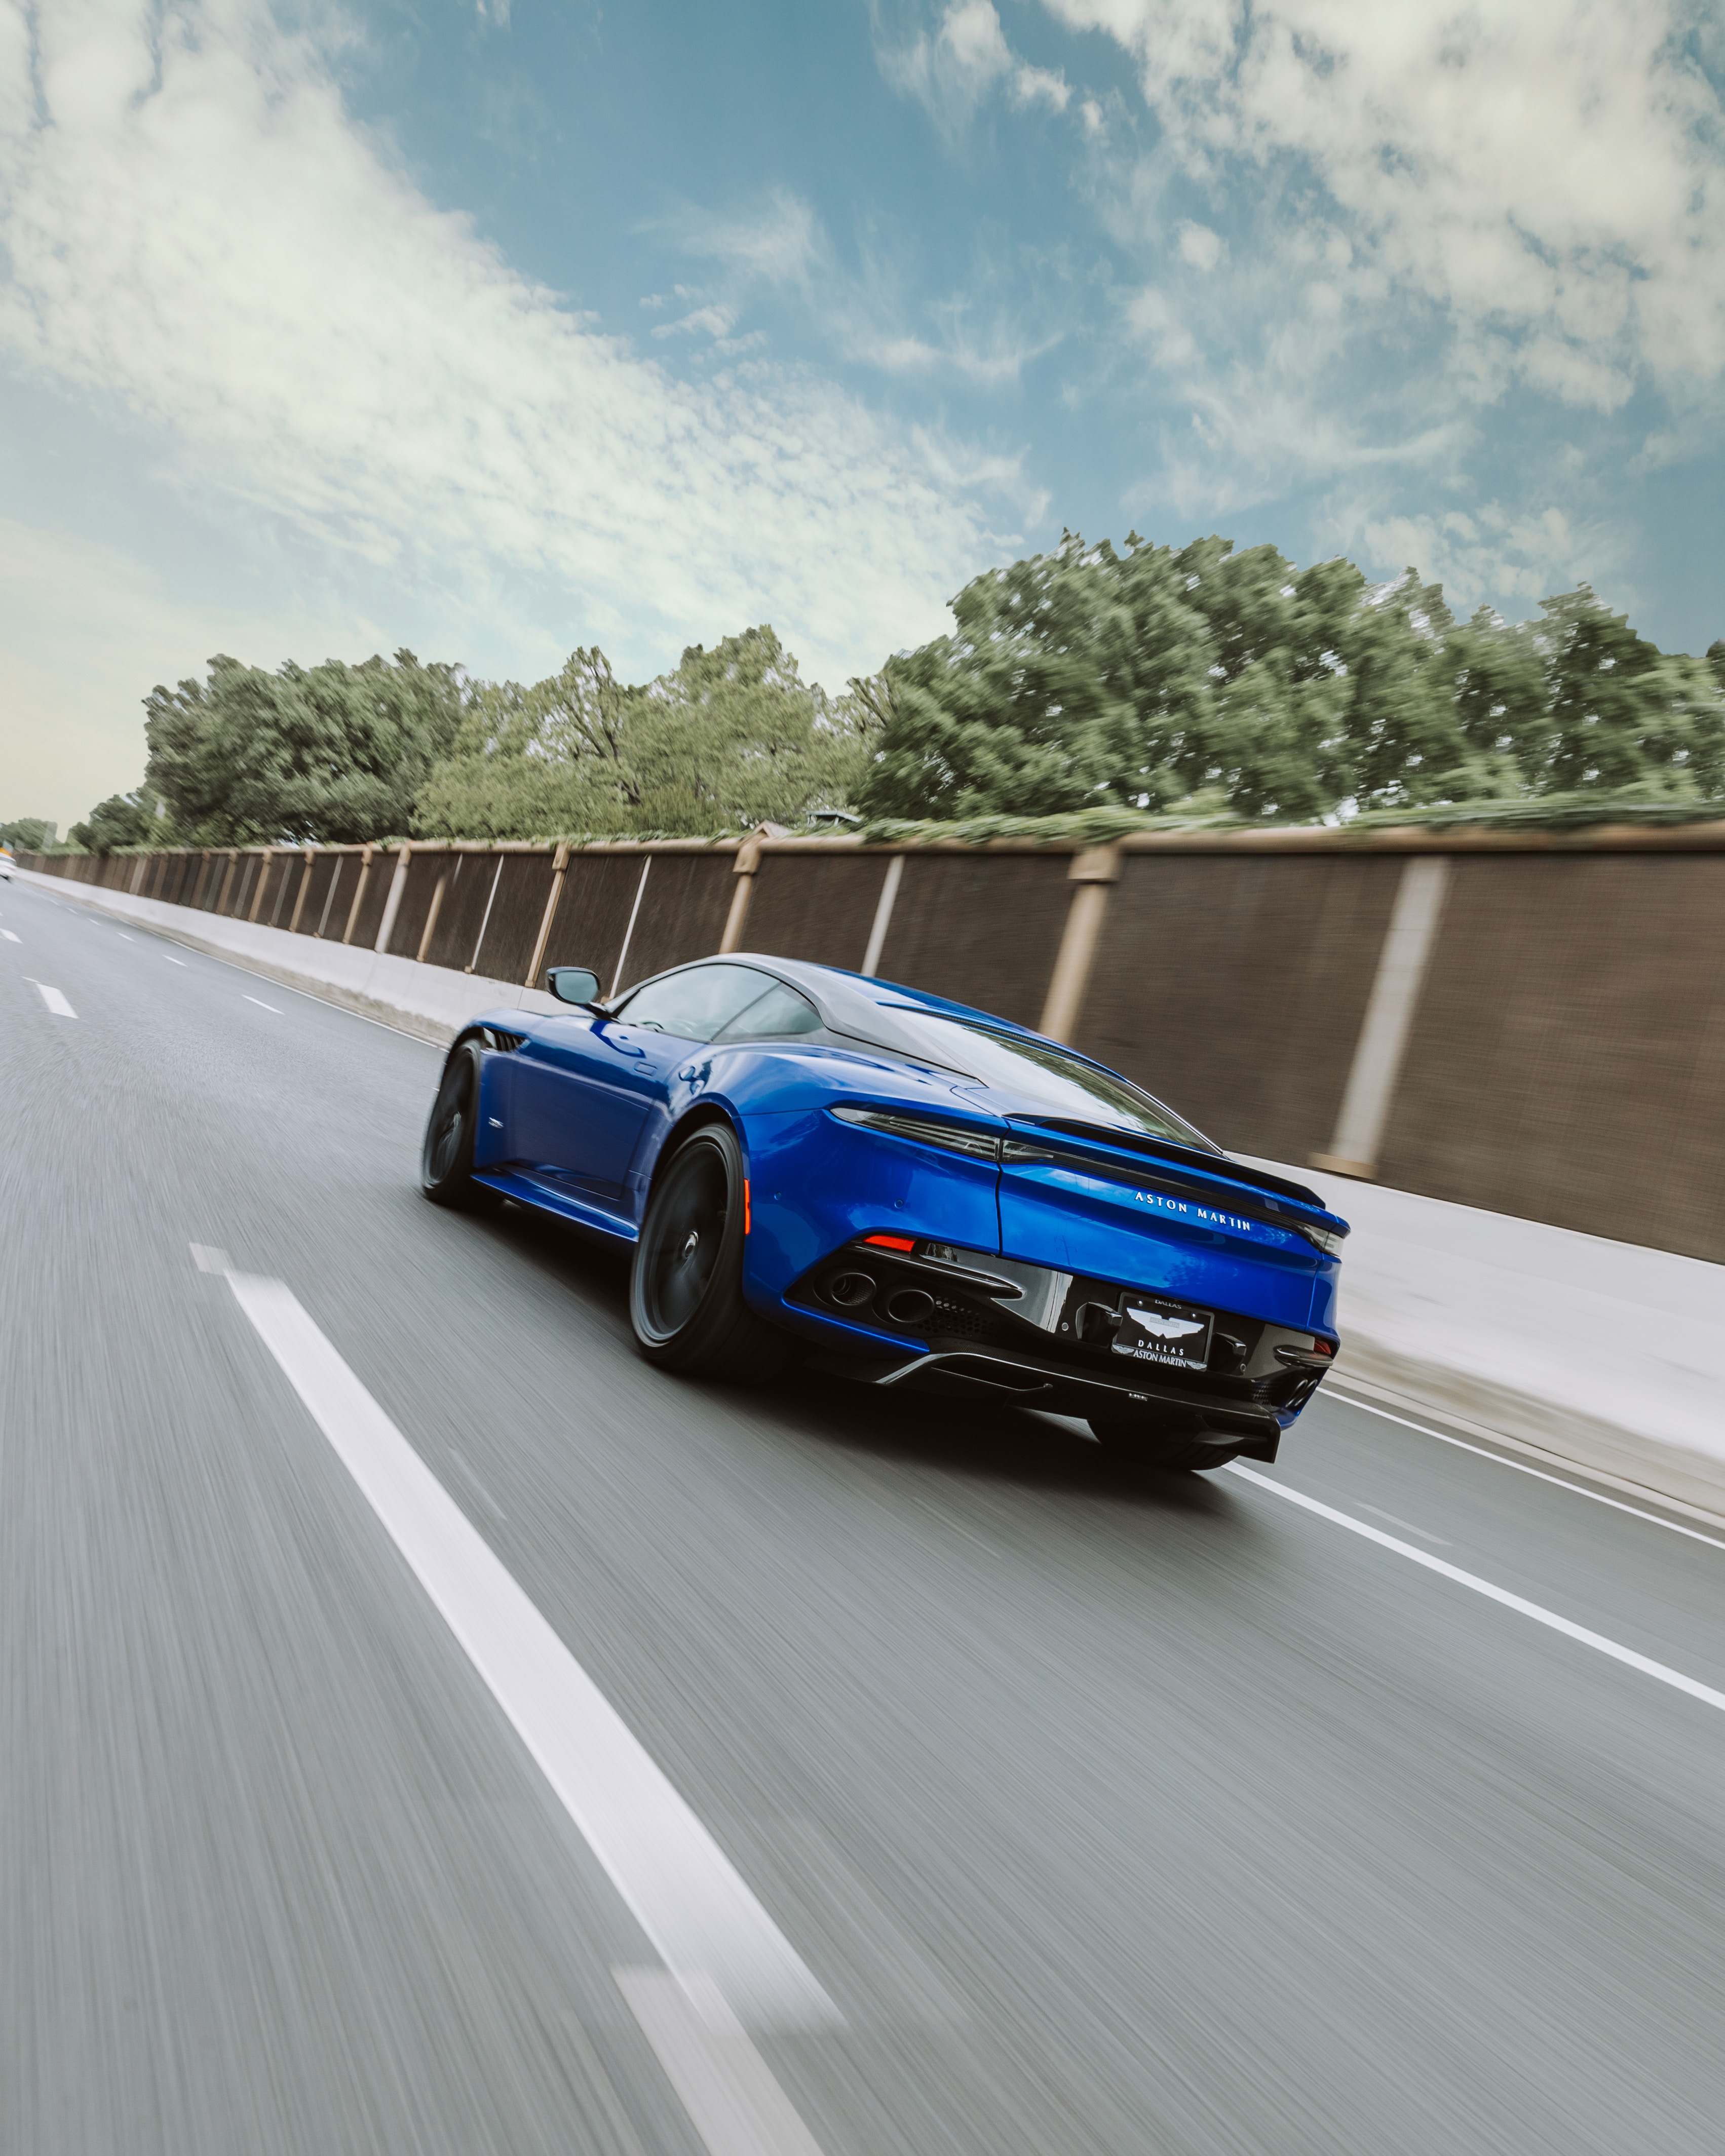 Cool Wallpapers aston martin, sports, cars, blue, road, car, traffic, movement, speed